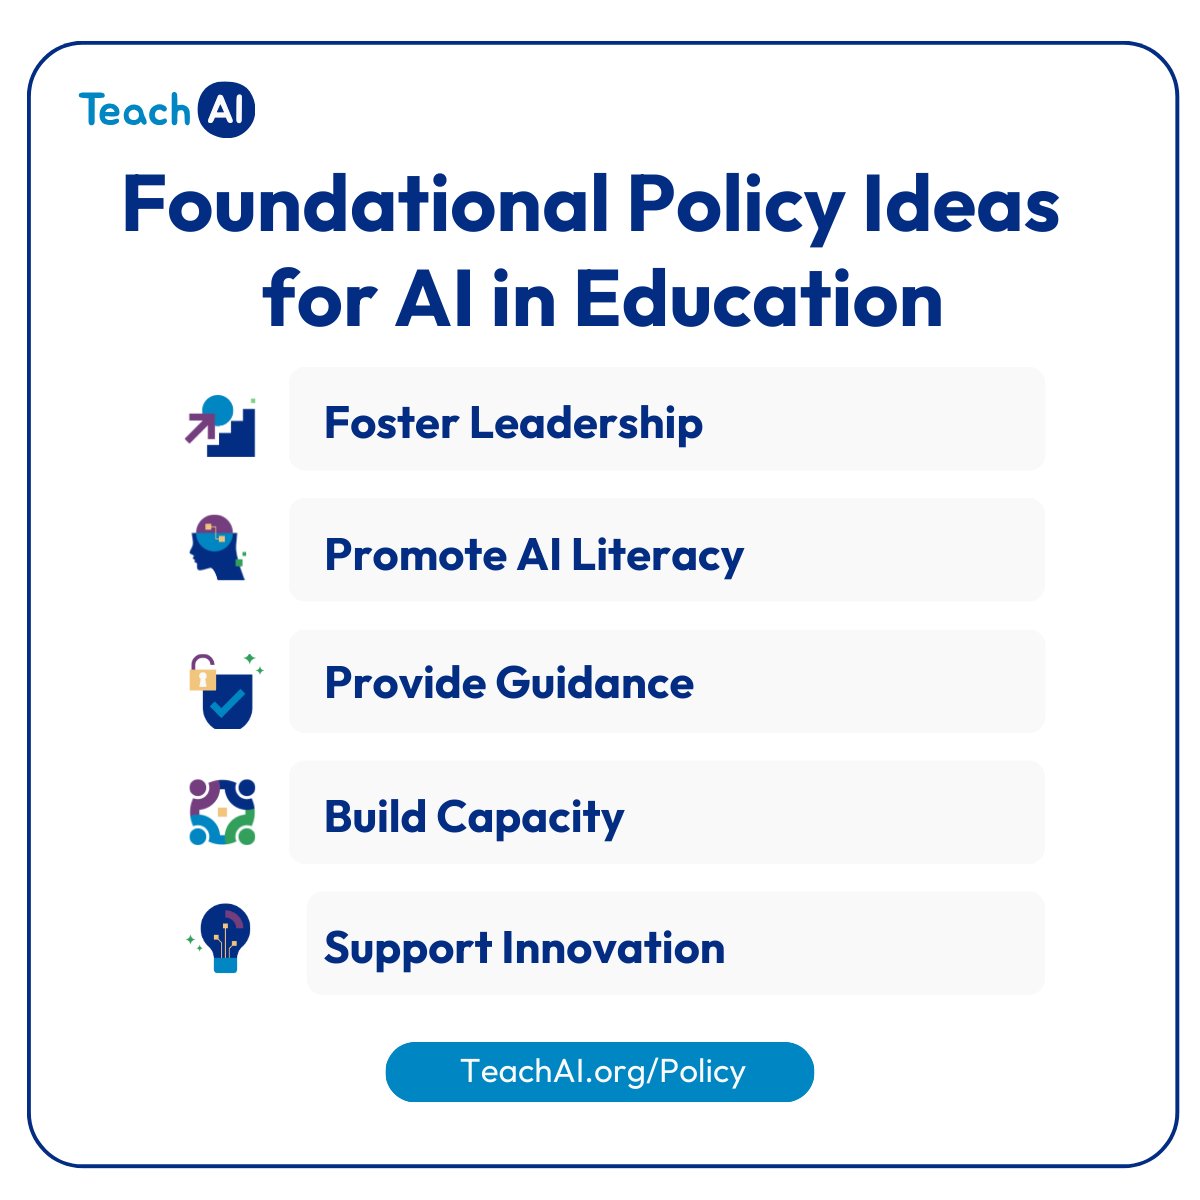 It's #NationalAILiteracyDay! Understanding AI helps decision-makers craft policies that promote its responsible use, access, and design. Learn more in #TeachAI’s “Foundational Policy Ideas for AI in Education' at teachai.org/policy.